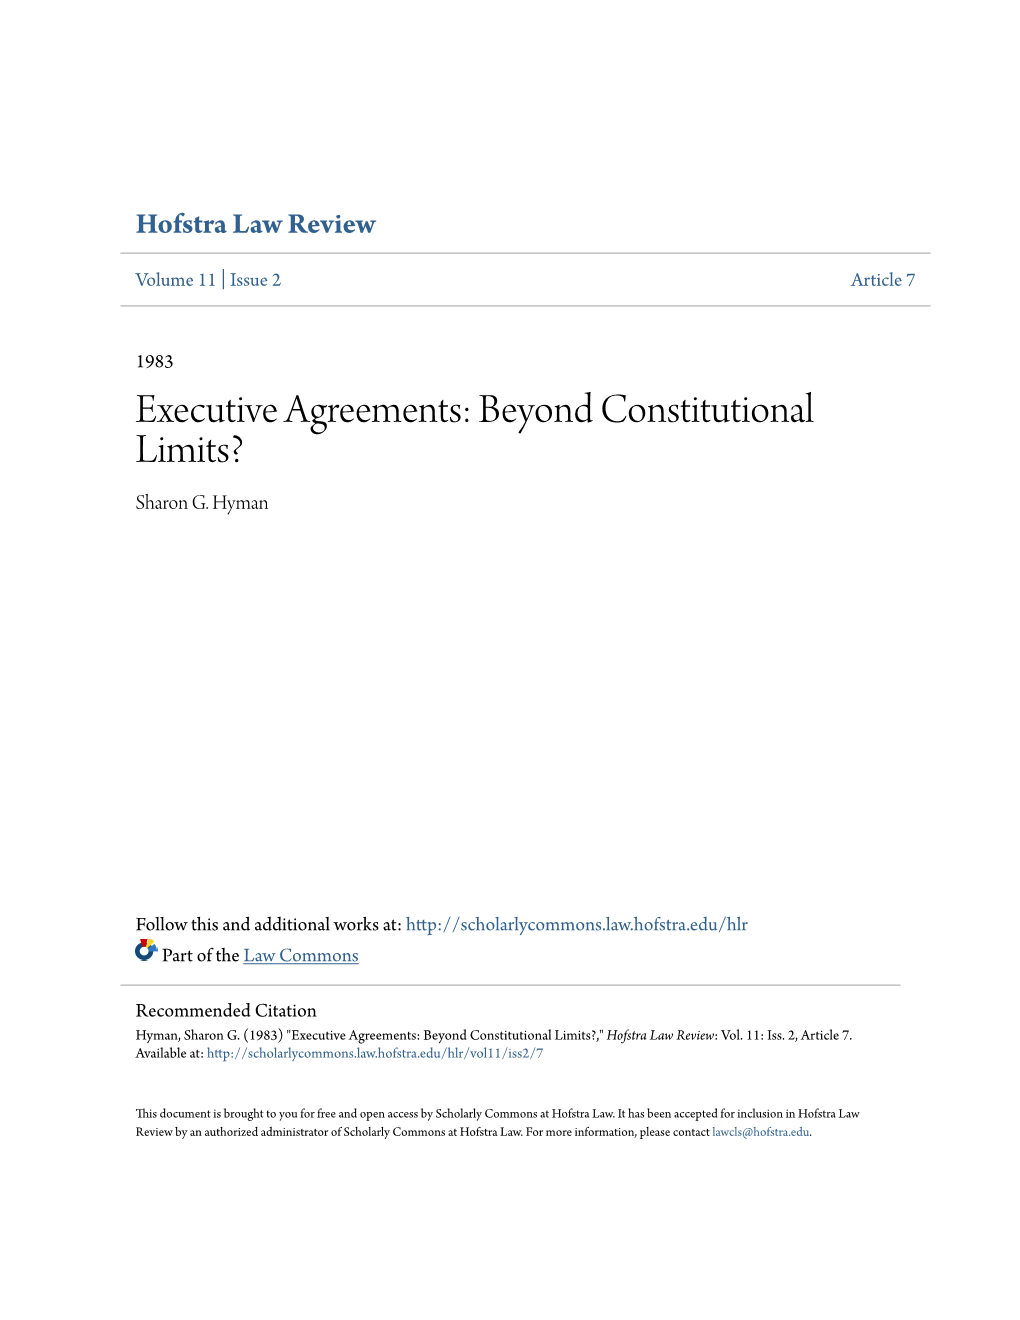 Executive Agreements: Beyond Constitutional Limits? Sharon G